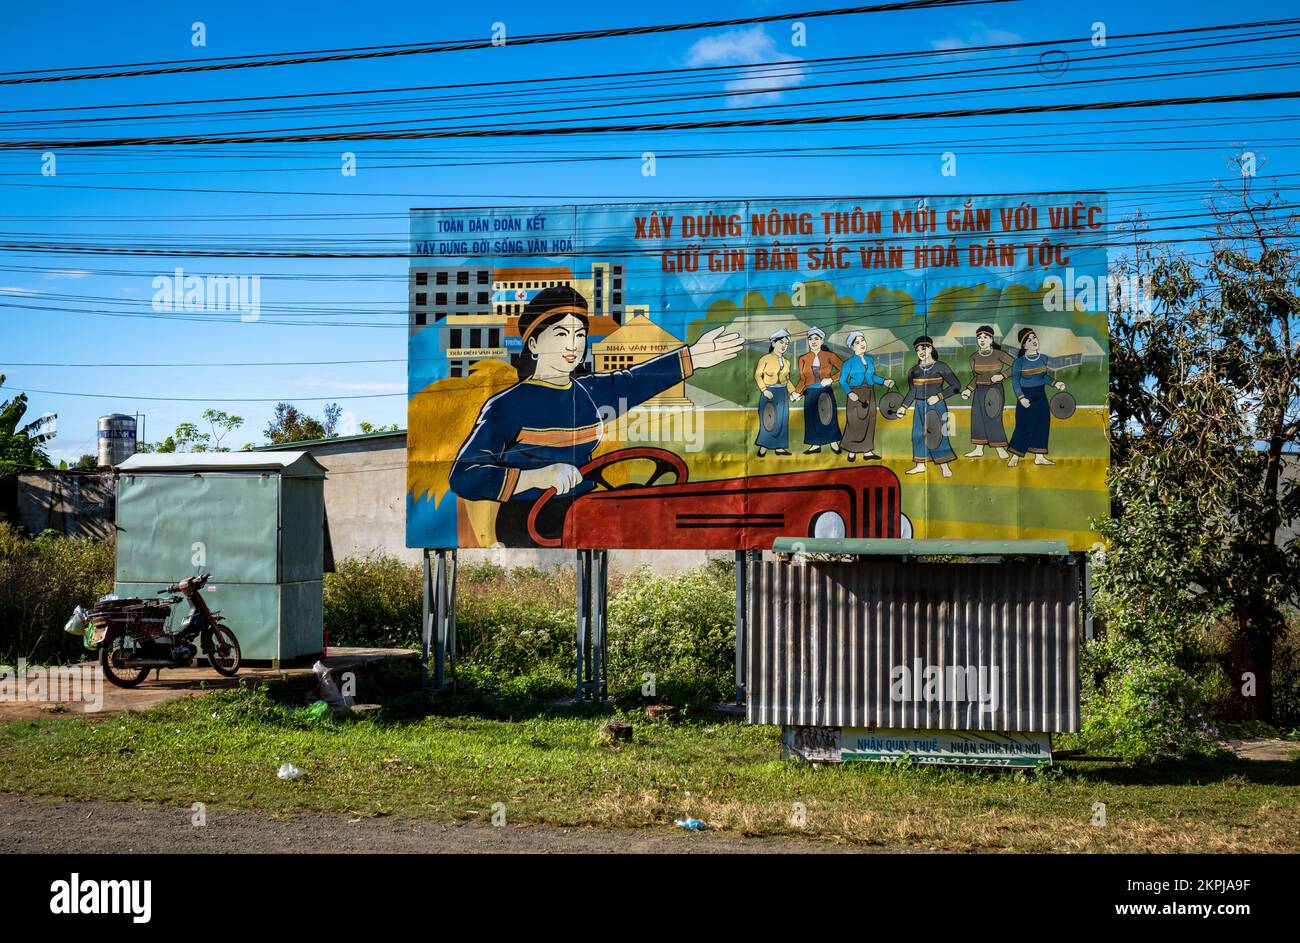 A Vietnam Communist Party painted propaganda billboard depicting ethnic minority people playing gfongs and driving a tractor.  The billboard urges peo Stock Photo